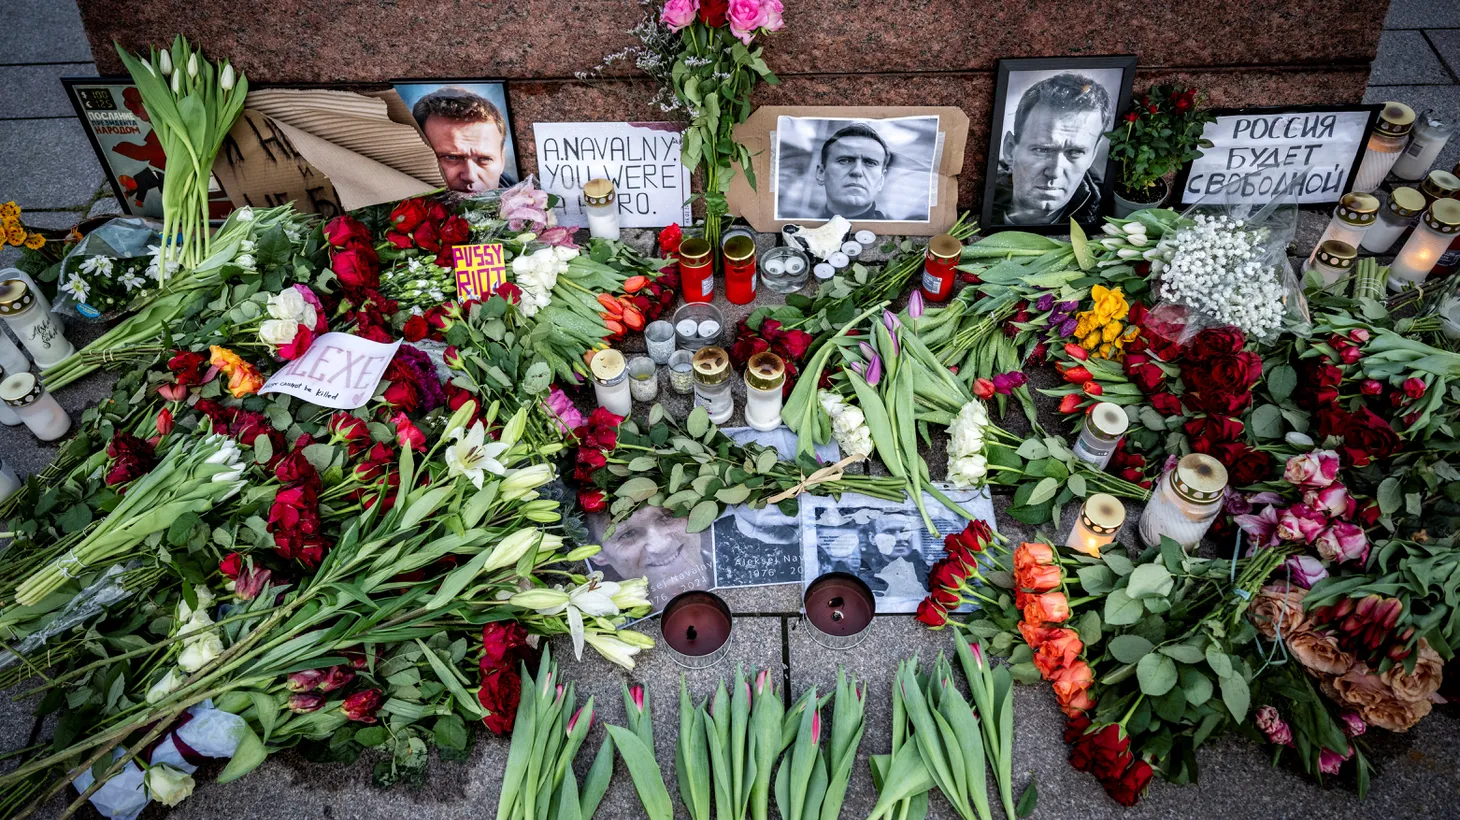 A memorial site for Alexei Navalny was set up at Carl Fredrik Reutersward's sculpture “Non-Violence” in Malmo, Sweden, February 20, 2024.